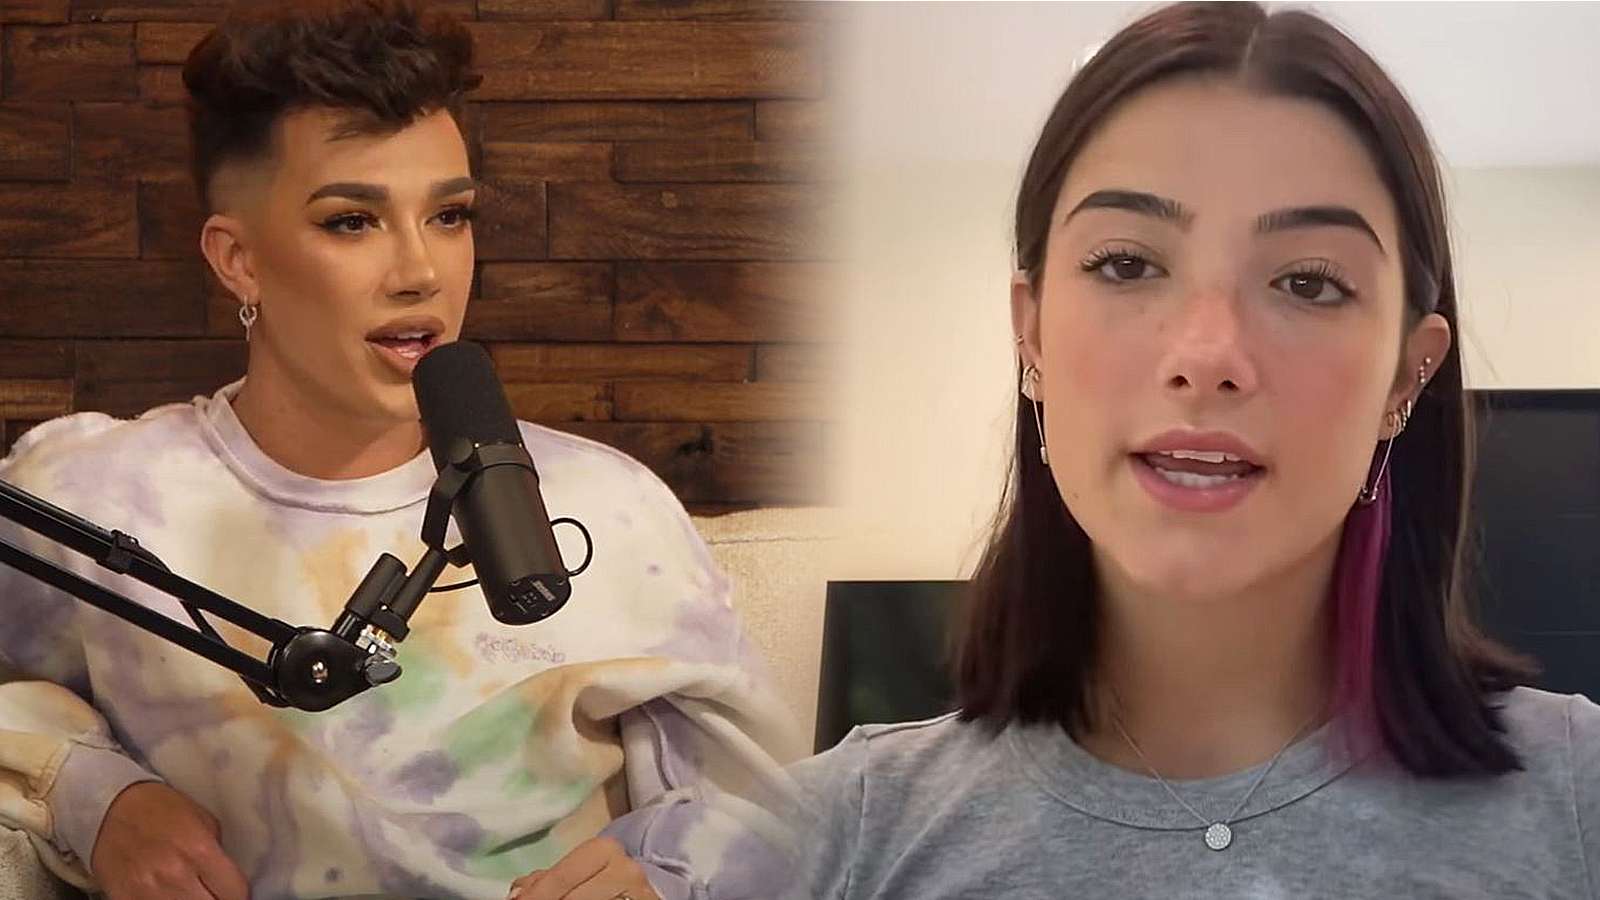 A photo of James Charles is shown next to a screenshot of Charli D'Amelio speaking to her camera during a vlog.